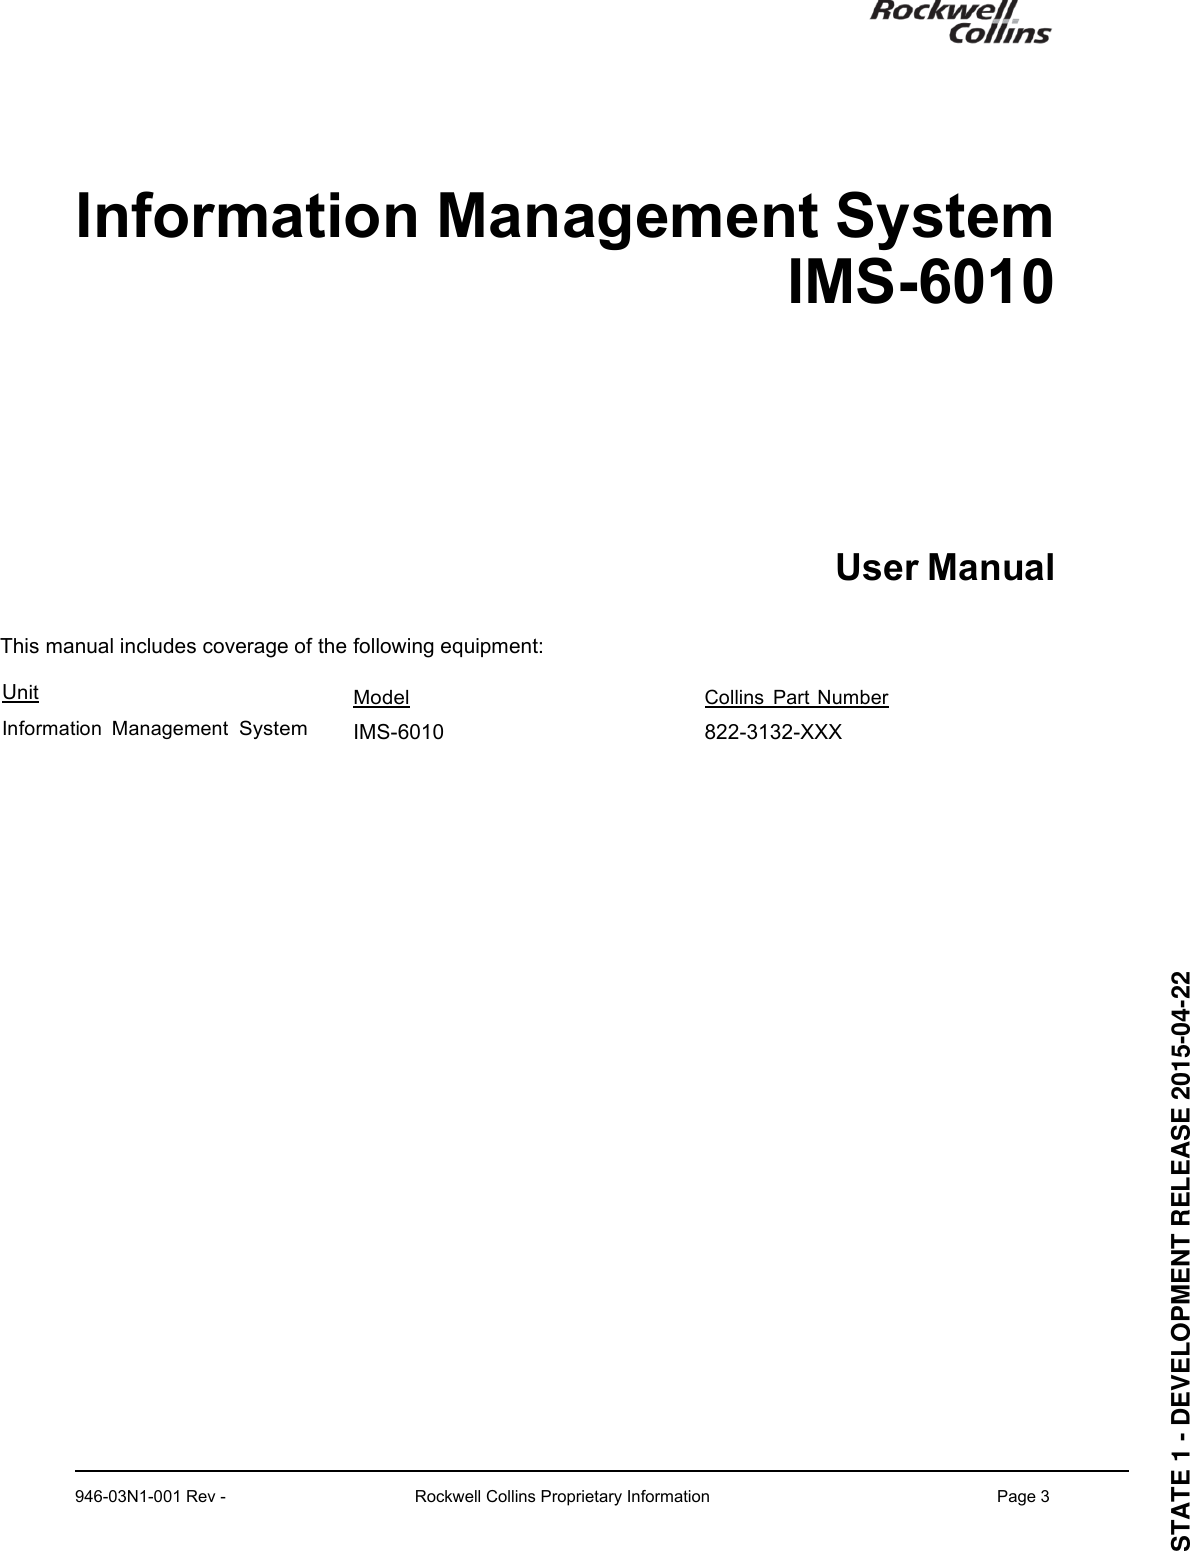  Information Management System IMS-6010 User Manual This manual includes coverage of the following equipment: Unit Model Collins Part Number Information Management System IMS-6010  822-3132-XXX   946-03N1-001 Rev - Rockwell Collins Proprietary InformationPage 3STATE 1 - DEVELOPMENT RELEASE 2015-04-22